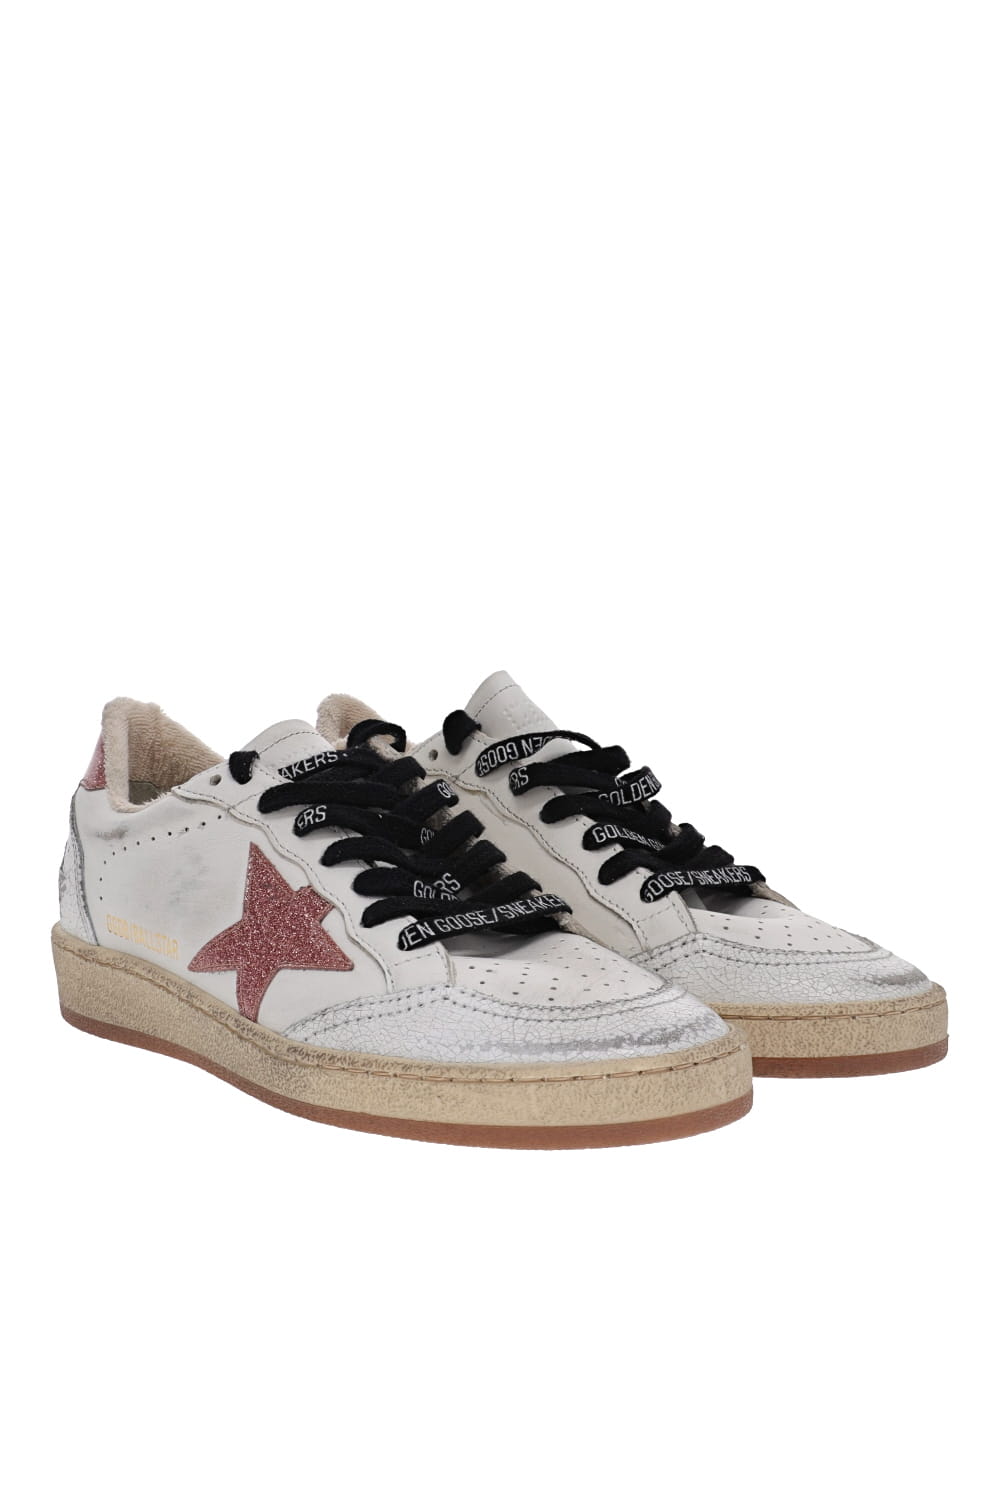 Golden Goose BALLSTAR LEATHER UPPER CRACK LEATHER TOE AND SPUR GLITTER STAR AND HEEL GWF00117.F005432.11141 WHITE/PEACH